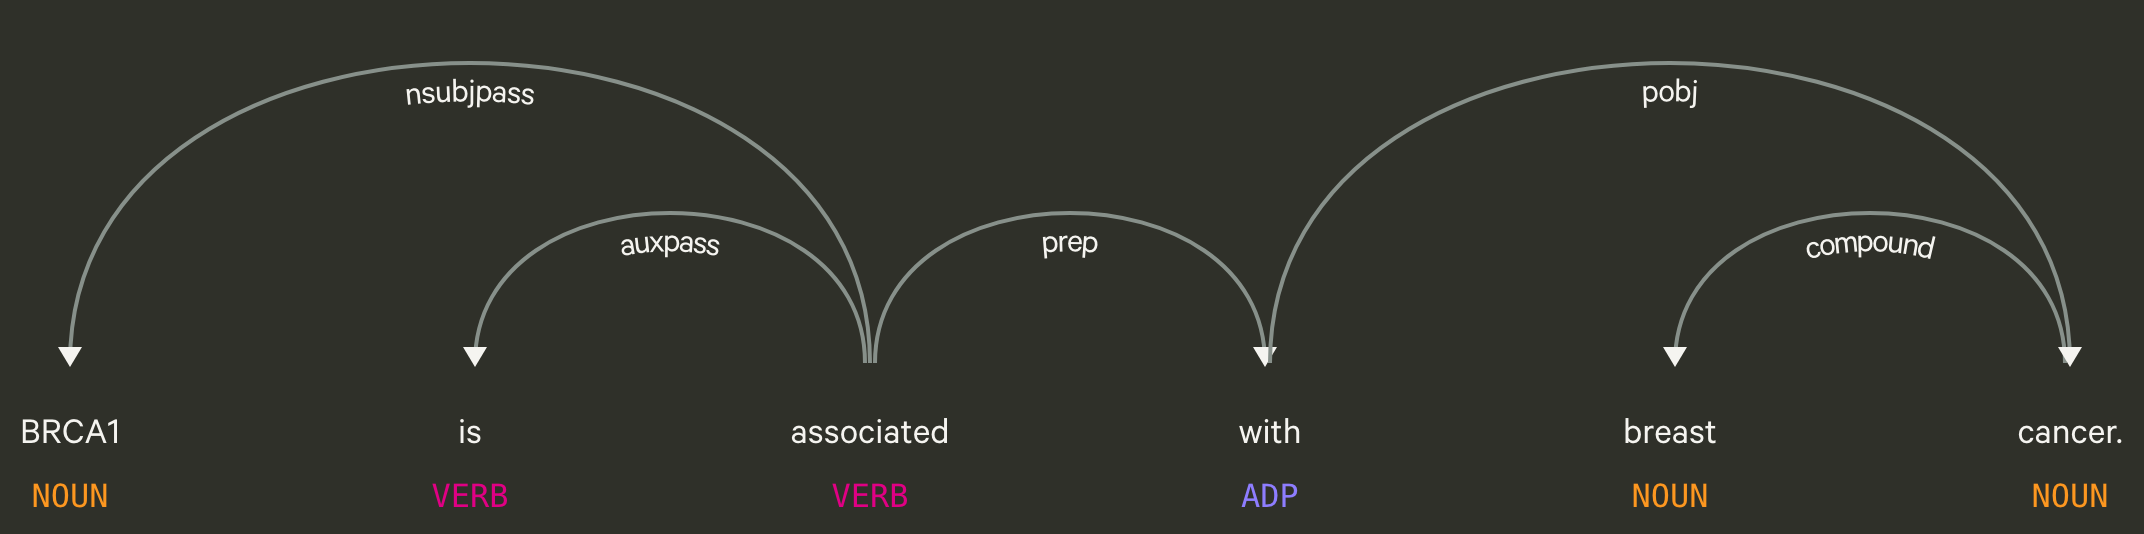 Figure 3: A visualization of a dependency parse tree using the following sentence: “BRCA1 is associated with breast cancer” [66]. For these type of trees the root begins with the main verb of the sentence. Each arrows represents the dependency shared between two words. For example, the dependency between BRCA1 and associated is nsubjpass, which stands for passive nominal subject. This means that “BRCA1” is the subject of the sentence and it is being referred to by the word “associated”.